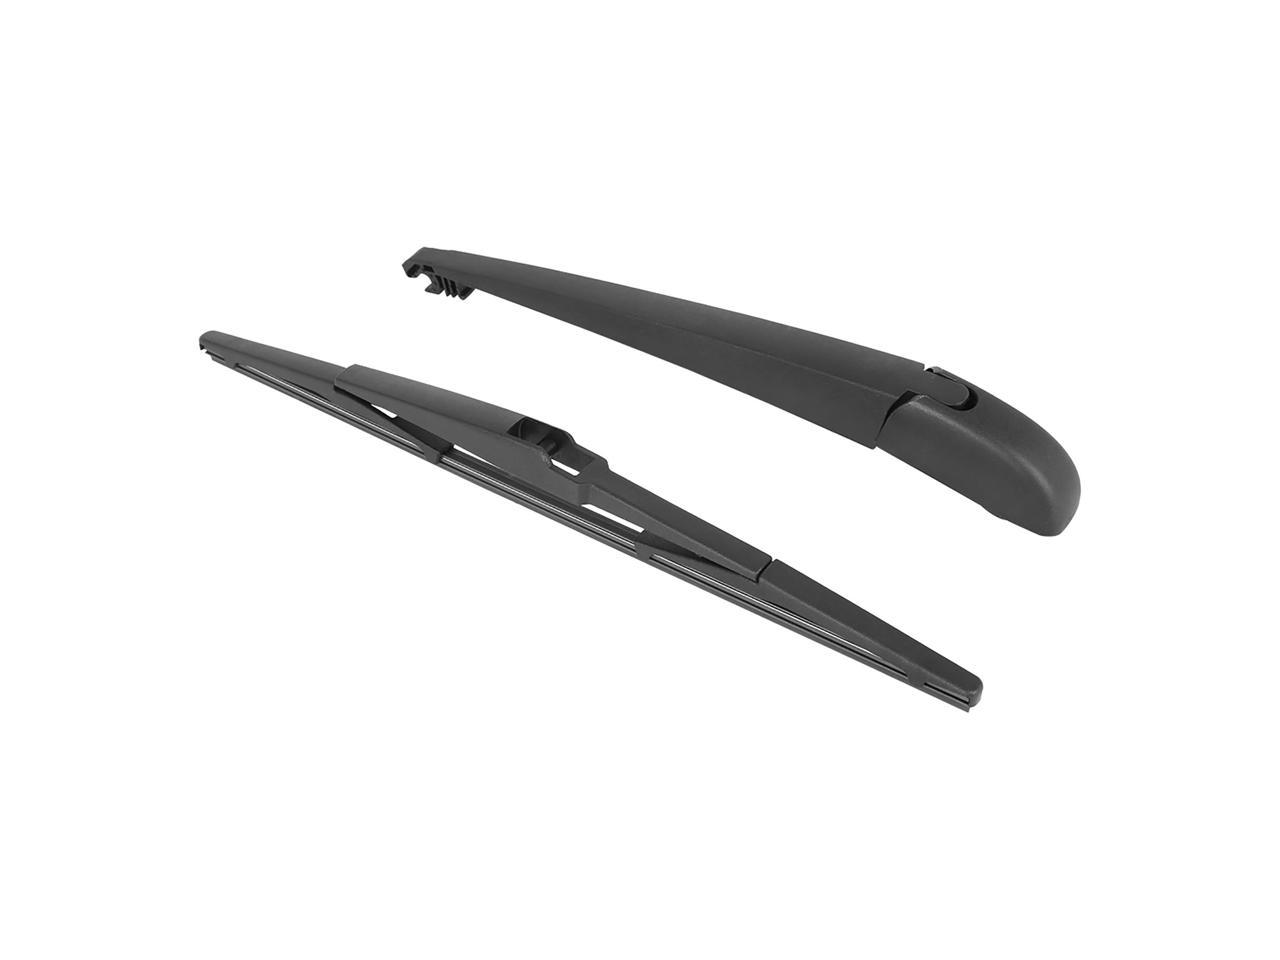 Car Rear Windshield Wiper Blade Arm Set for 2014-2019 Jeep Cherokee KL 14 Inch - Newegg.com 2019 Jeep Cherokee Rear Wiper Blade Replacement